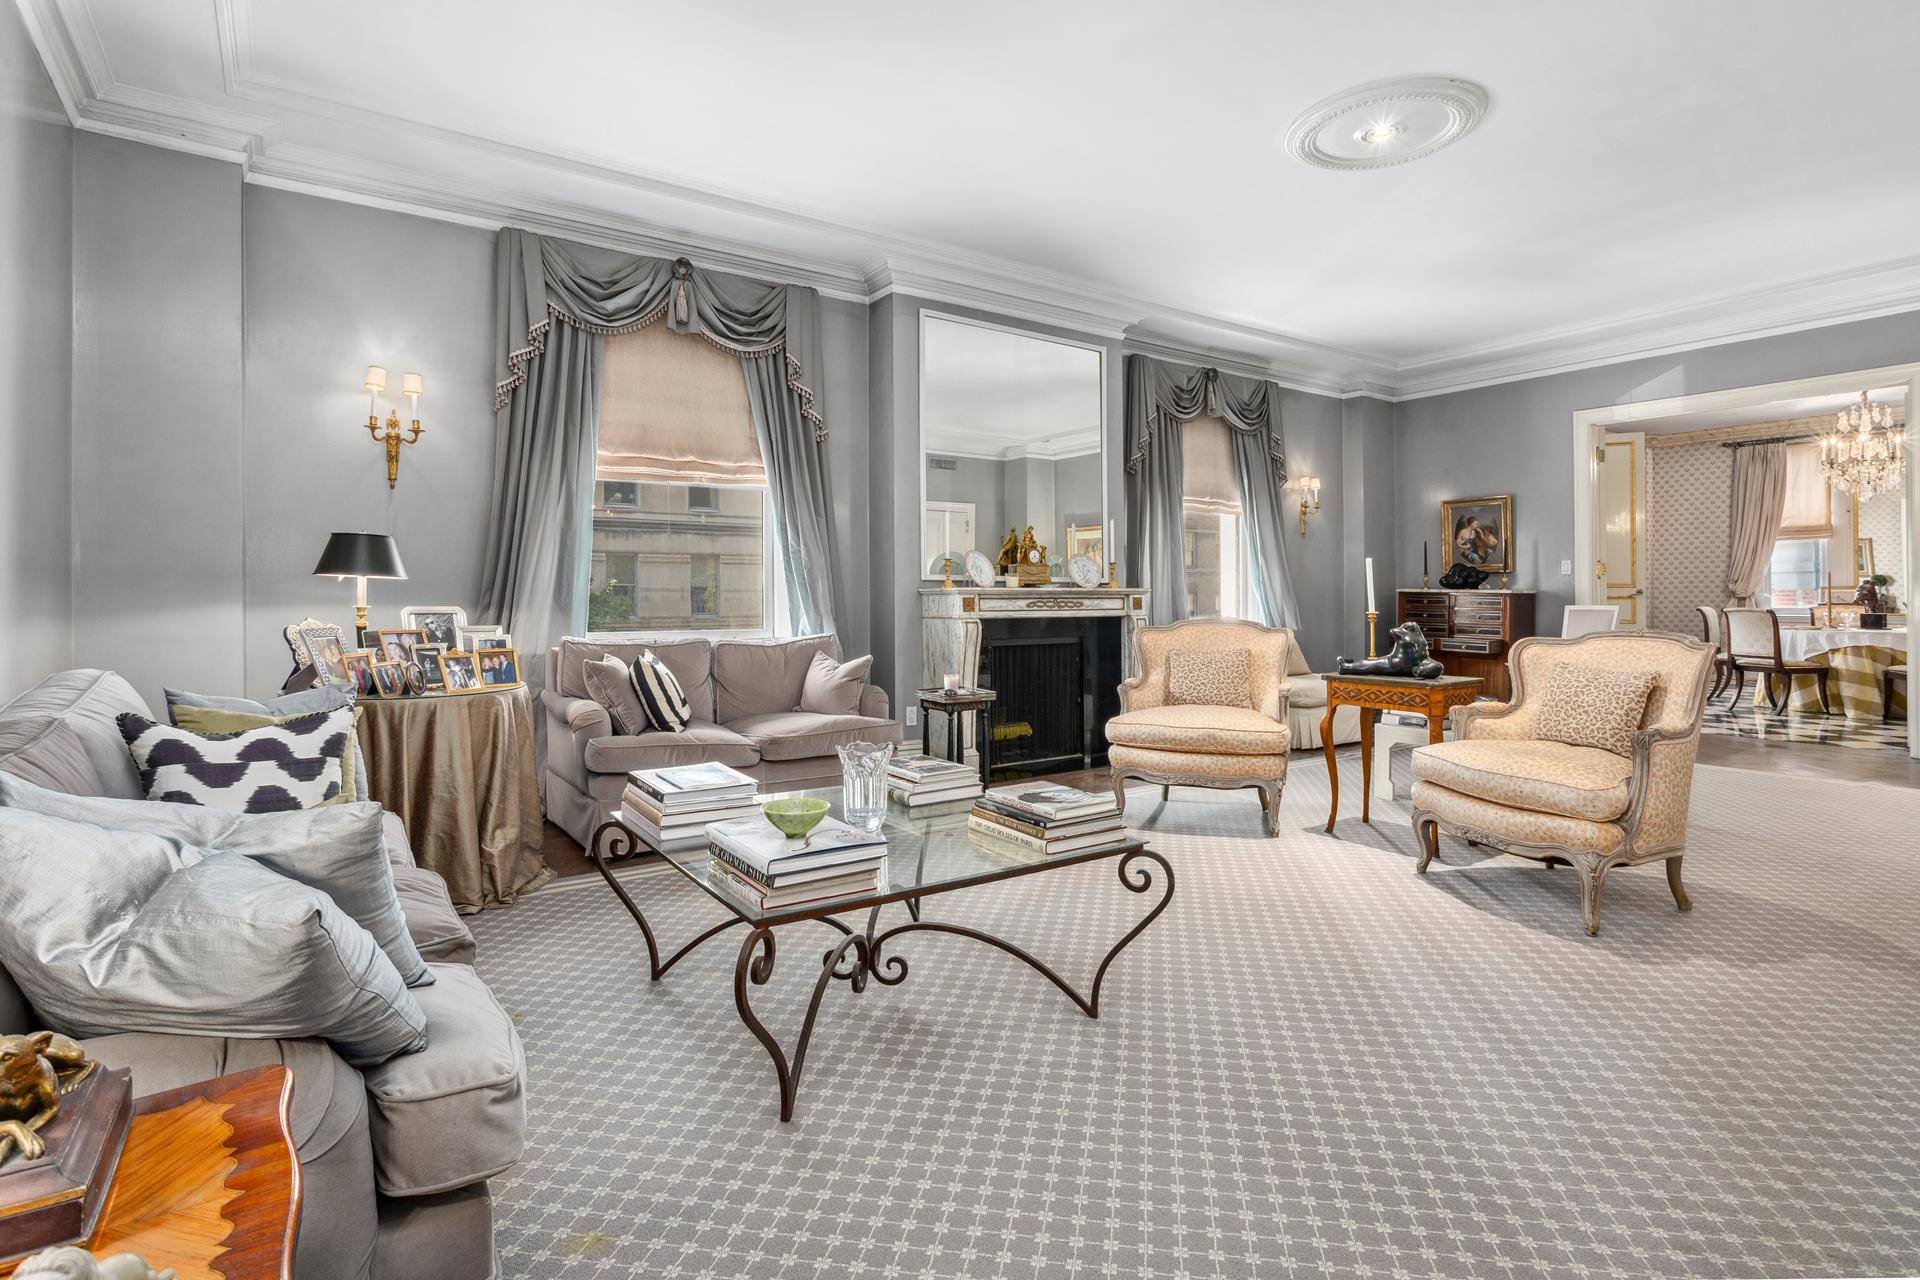 Welcome to the world of timeless elegance at this classic 7 residence, ideally situated on Madison Avenue and East 72nd Street, right down the street from Central Park.